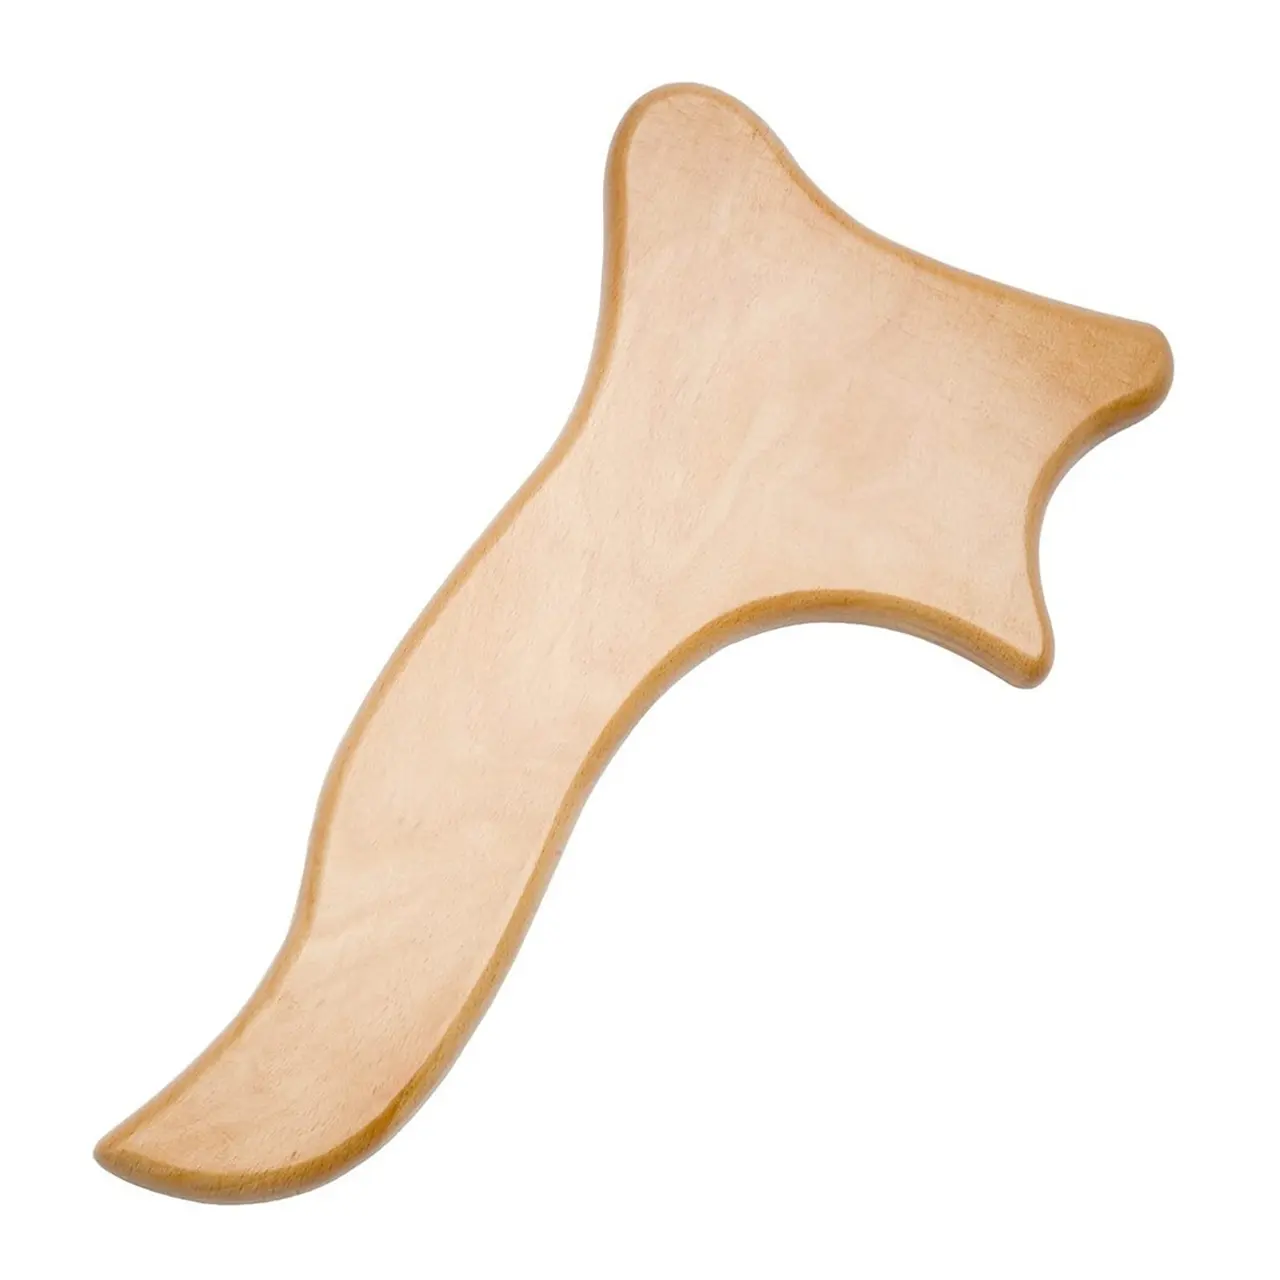 Popular Wood Therapy Massage Tool For Body Shape Wooden Gua Sha Board Lymphatic Drainage Massager Anti Cellulite Wood Guasha